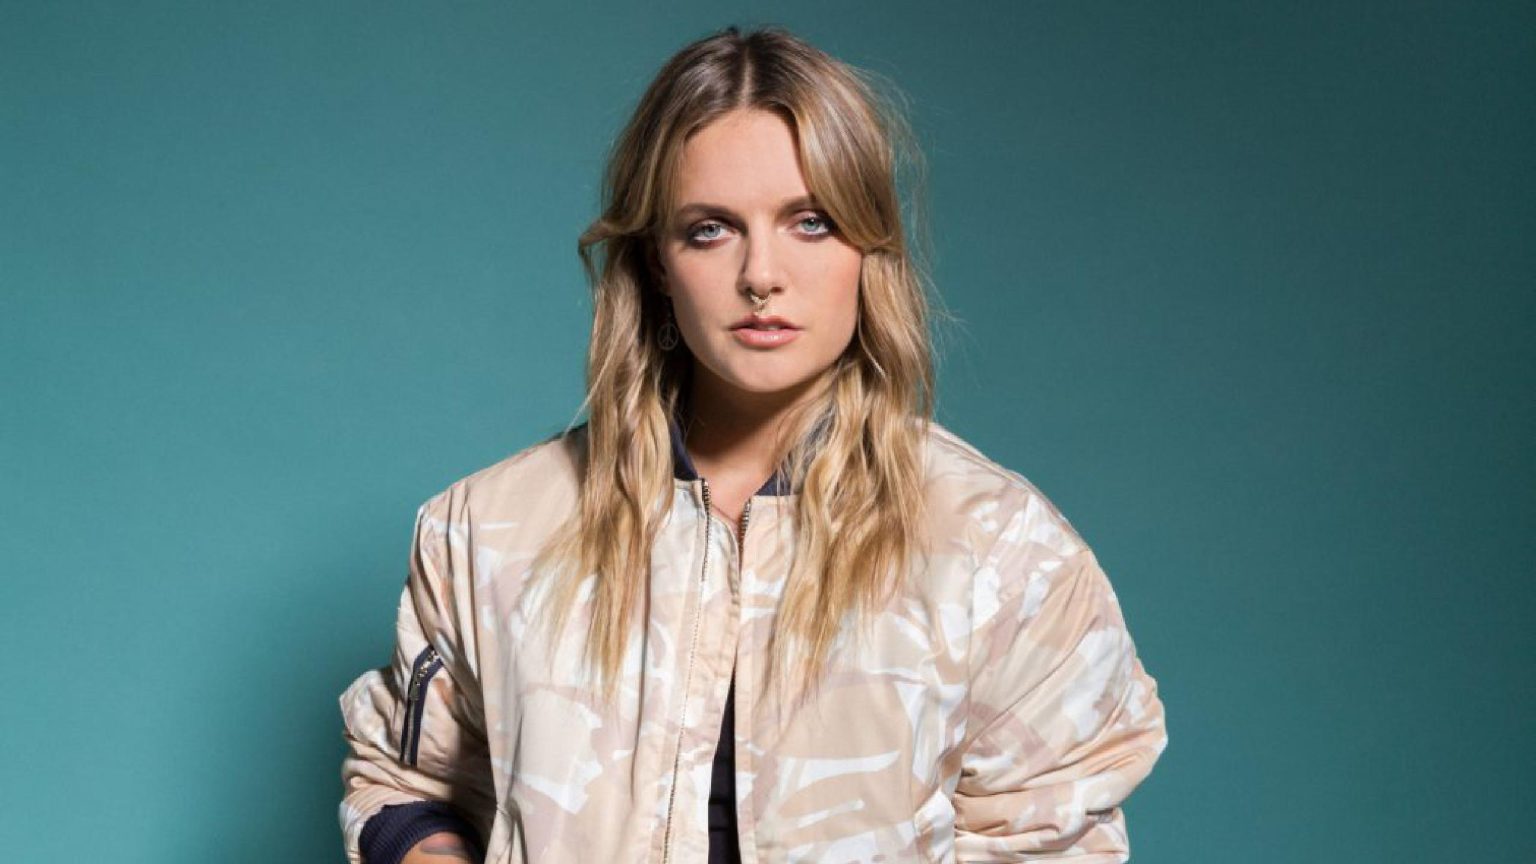 Tove Lo Tour Dates 2023 Where to buy tickets and more